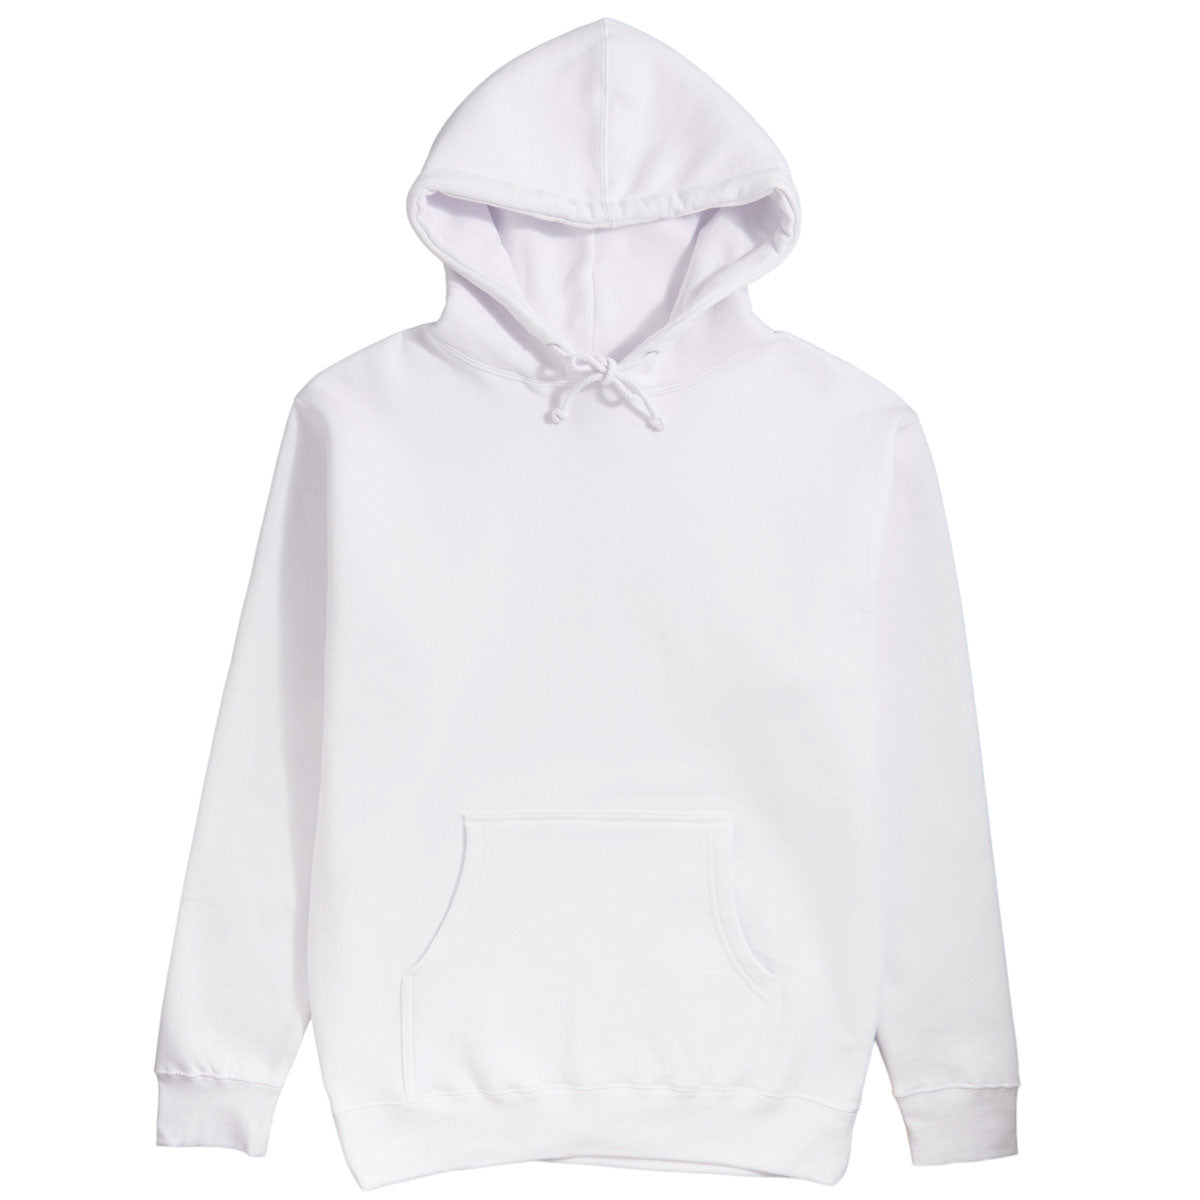 Converse Body Horror Pullover Hoodie - White - LG image 1